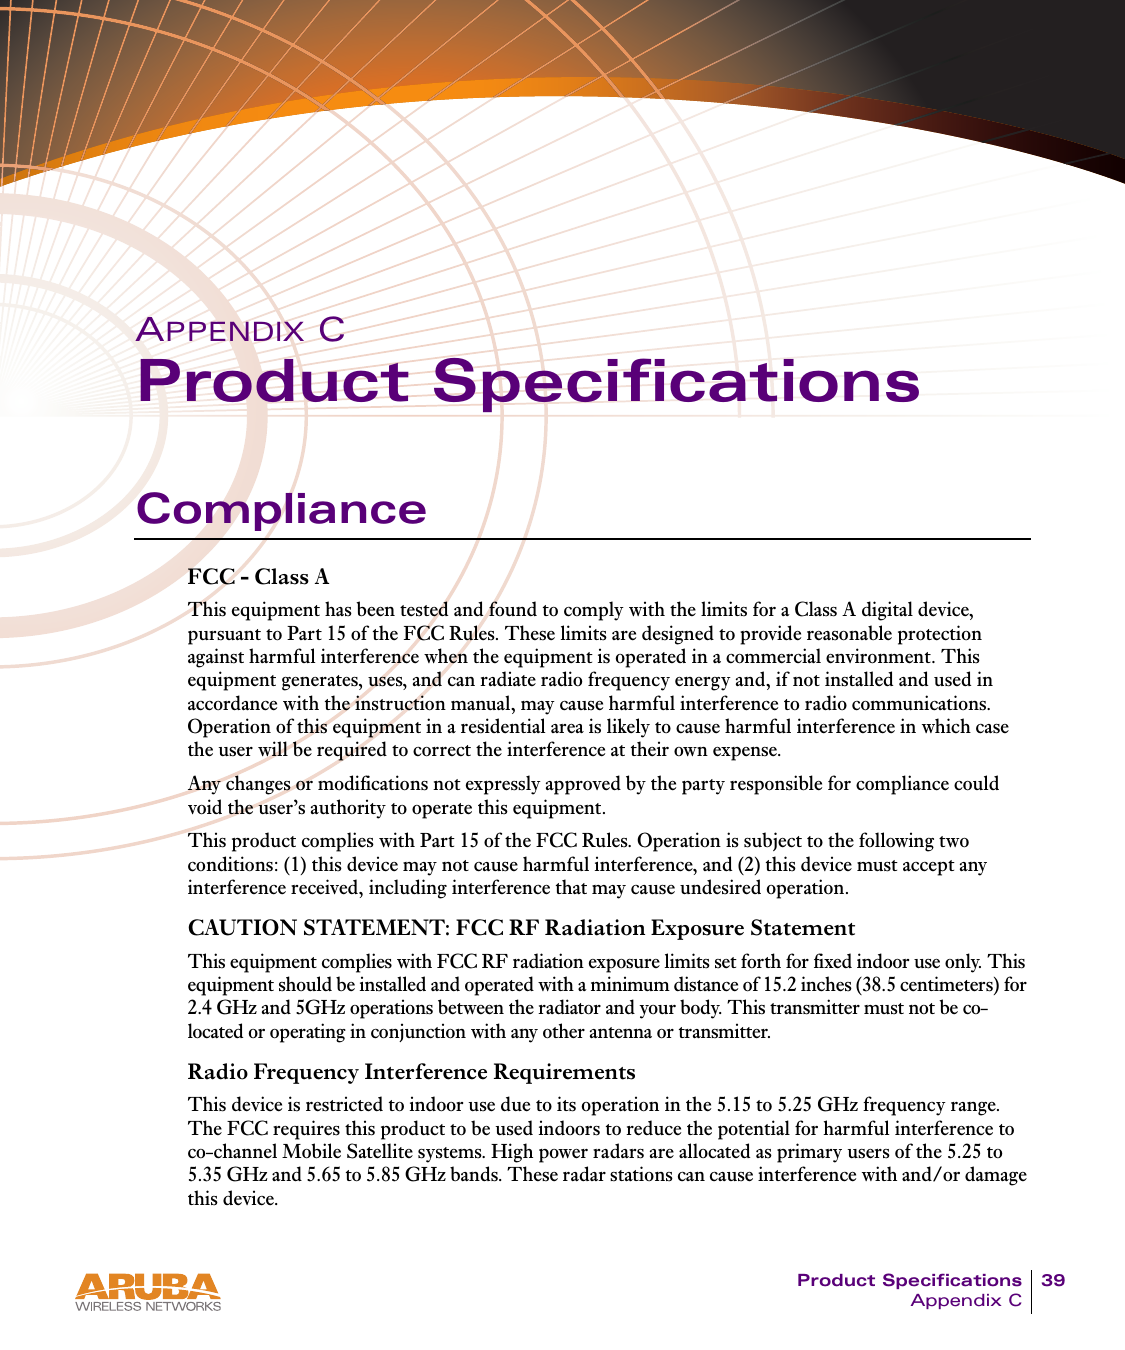 Product Specifications 39Appendix CAPPENDIX CProduct SpecificationsComplianceFCC - Class AThis equipment has been tested and found to comply with the limits for a Class A digital device, pursuant to Part 15 of the FCC Rules. These limits are designed to provide reasonable protection against harmful interference when the equipment is operated in a commercial environment. This equipment generates, uses, and can radiate radio frequency energy and, if not installed and used in accordance with the instruction manual, may cause harmful interference to radio communications. Operation of this equipment in a residential area is likely to cause harmful interference in which case the user will be required to correct the interference at their own expense.Any changes or modifications not expressly approved by the party responsible for compliance could void the user’s authority to operate this equipment.This product complies with Part 15 of the FCC Rules. Operation is subject to the following two conditions: (1) this device may not cause harmful interference, and (2) this device must accept any interference received, including interference that may cause undesired operation.CAUTION STATEMENT: FCC RF Radiation Exposure StatementThis equipment complies with FCC RF radiation exposure limits set forth for fixed indoor use only. This equipment should be installed and operated with a minimum distance of 15.2 inches (38.5 centimeters) for 2.4 GHz and 5GHz operations between the radiator and your body. This transmitter must not be co-located or operating in conjunction with any other antenna or transmitter.Radio Frequency Interference RequirementsThis device is restricted to indoor use due to its operation in the 5.15 to 5.25 GHz frequency range. The FCC requires this product to be used indoors to reduce the potential for harmful interference to co-channel Mobile Satellite systems. High power radars are allocated as primary users of the 5.25 to 5.35 GHz and 5.65 to 5.85 GHz bands. These radar stations can cause interference with and/or damage this device.